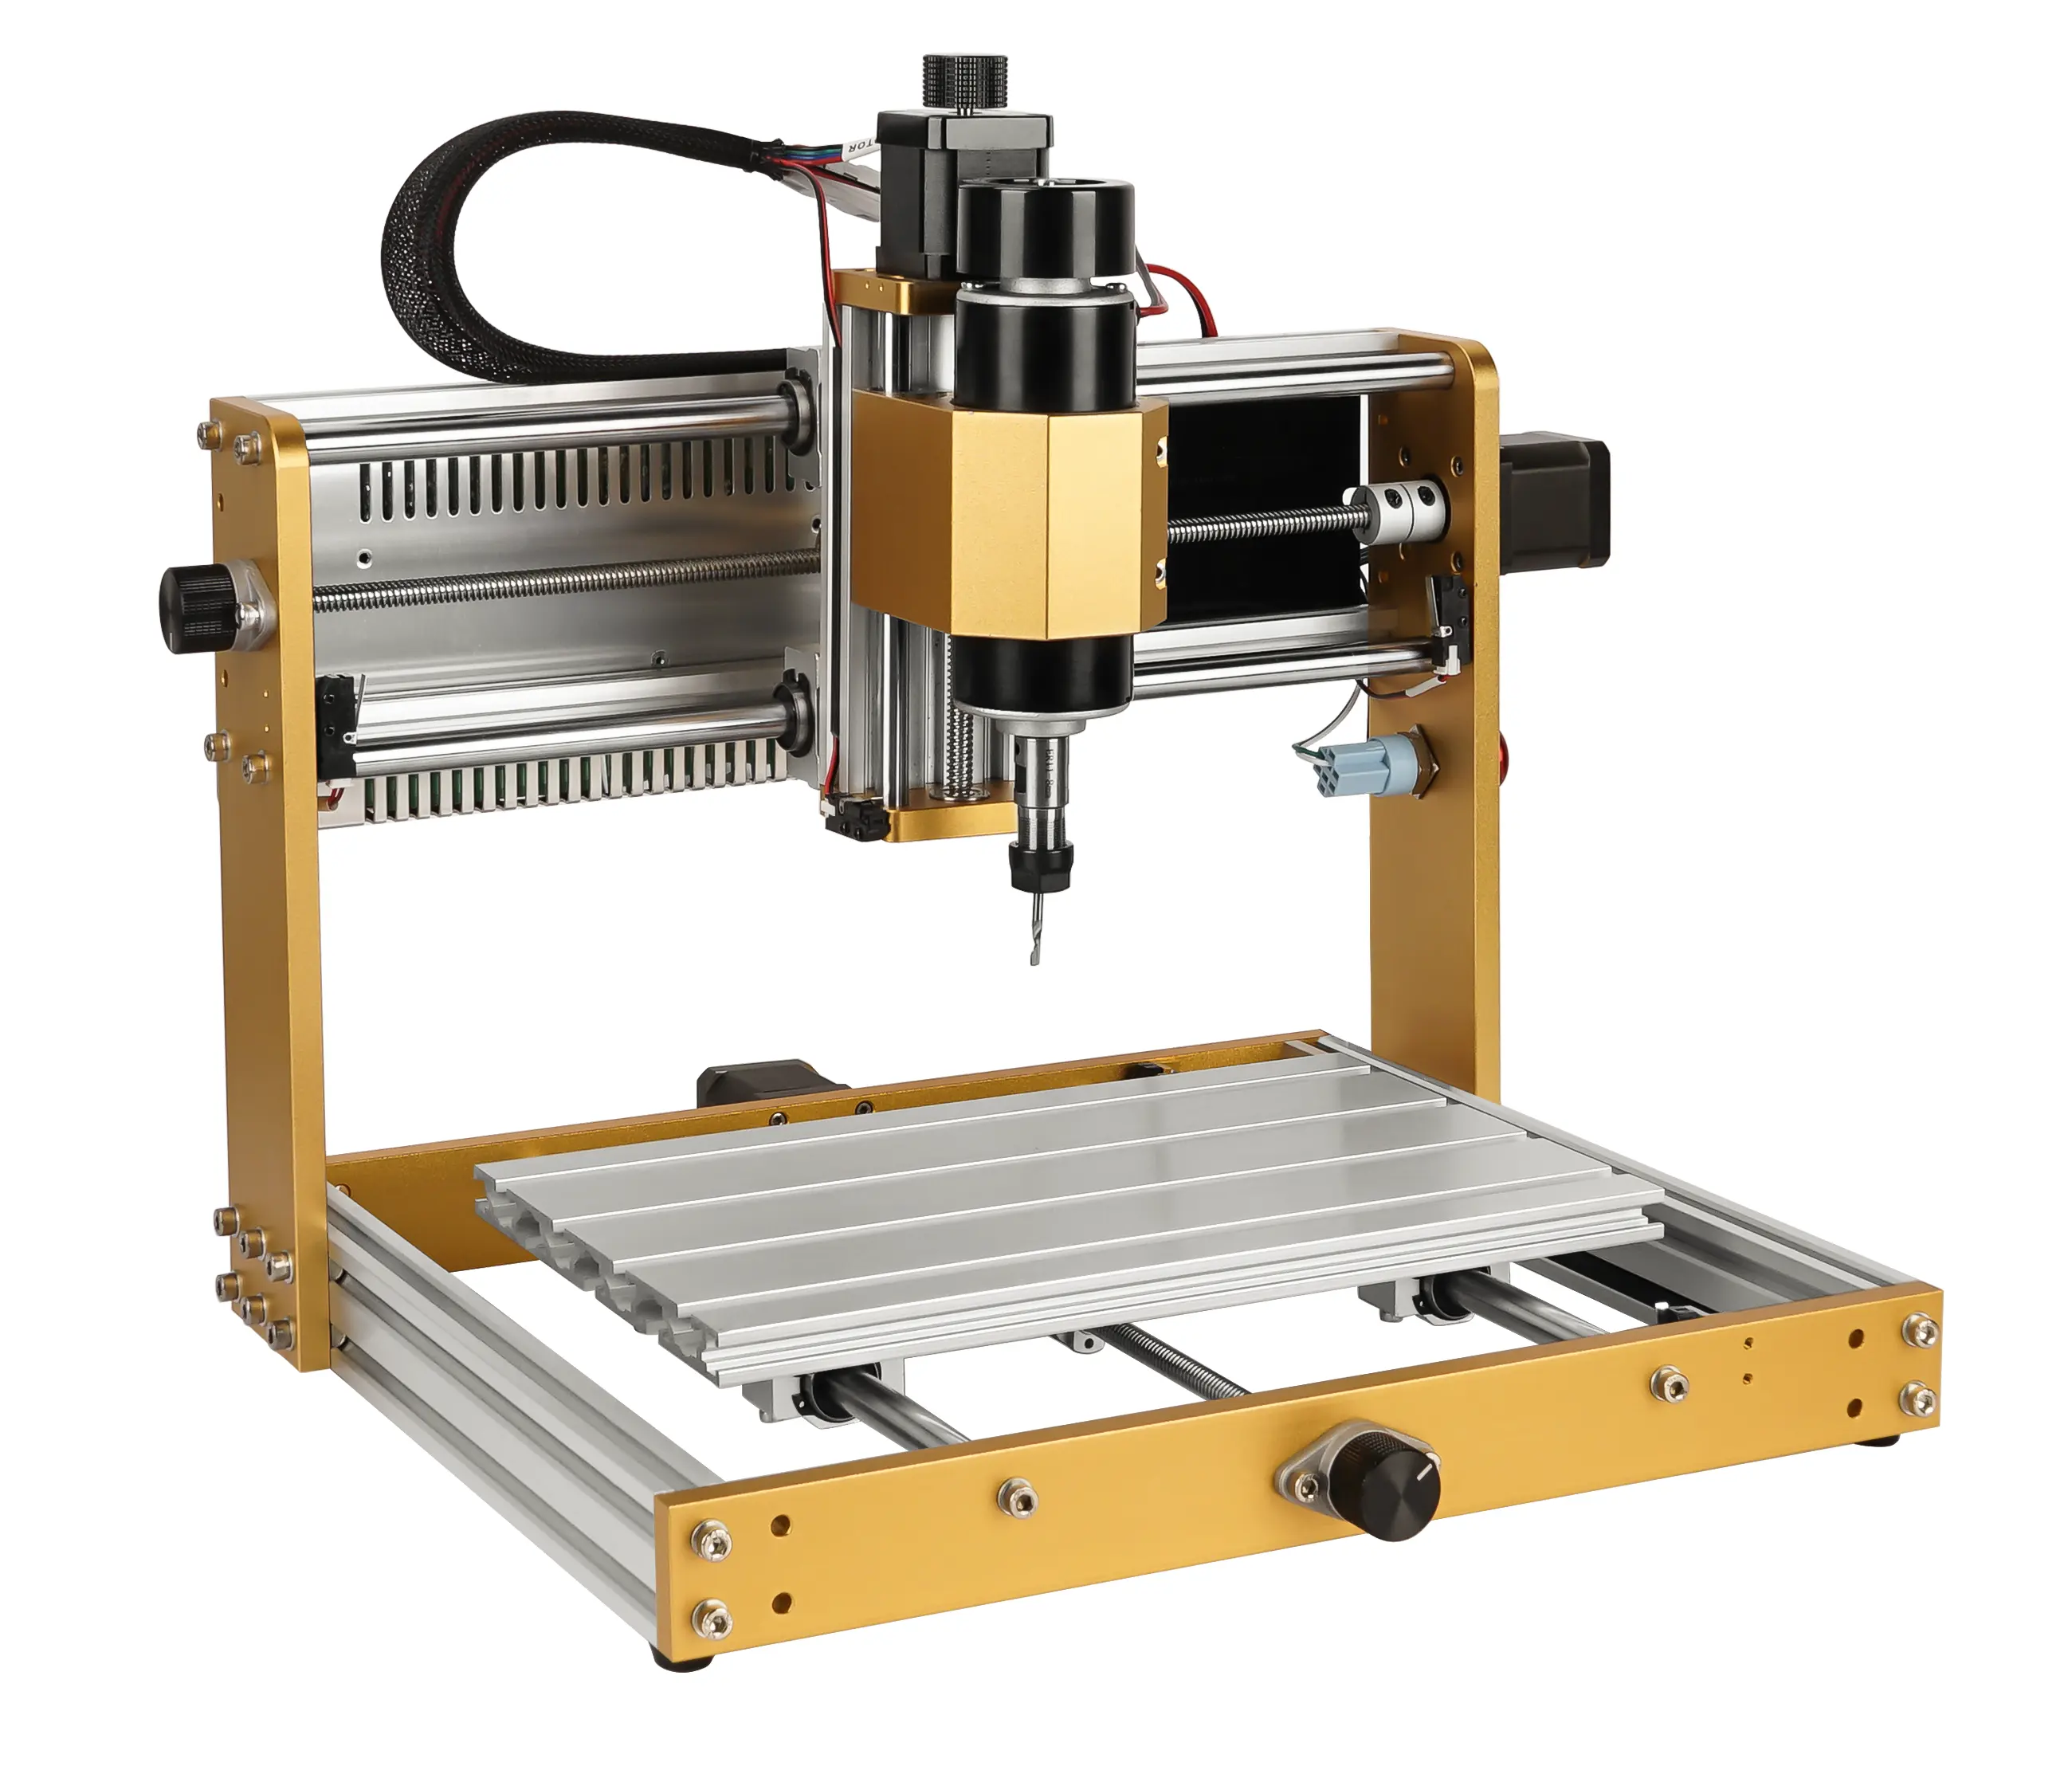 Hot sale 3018 plus2.0 stone cnc router system 2 in 1 5.5w 10w cnc Laser engraving machine for metal